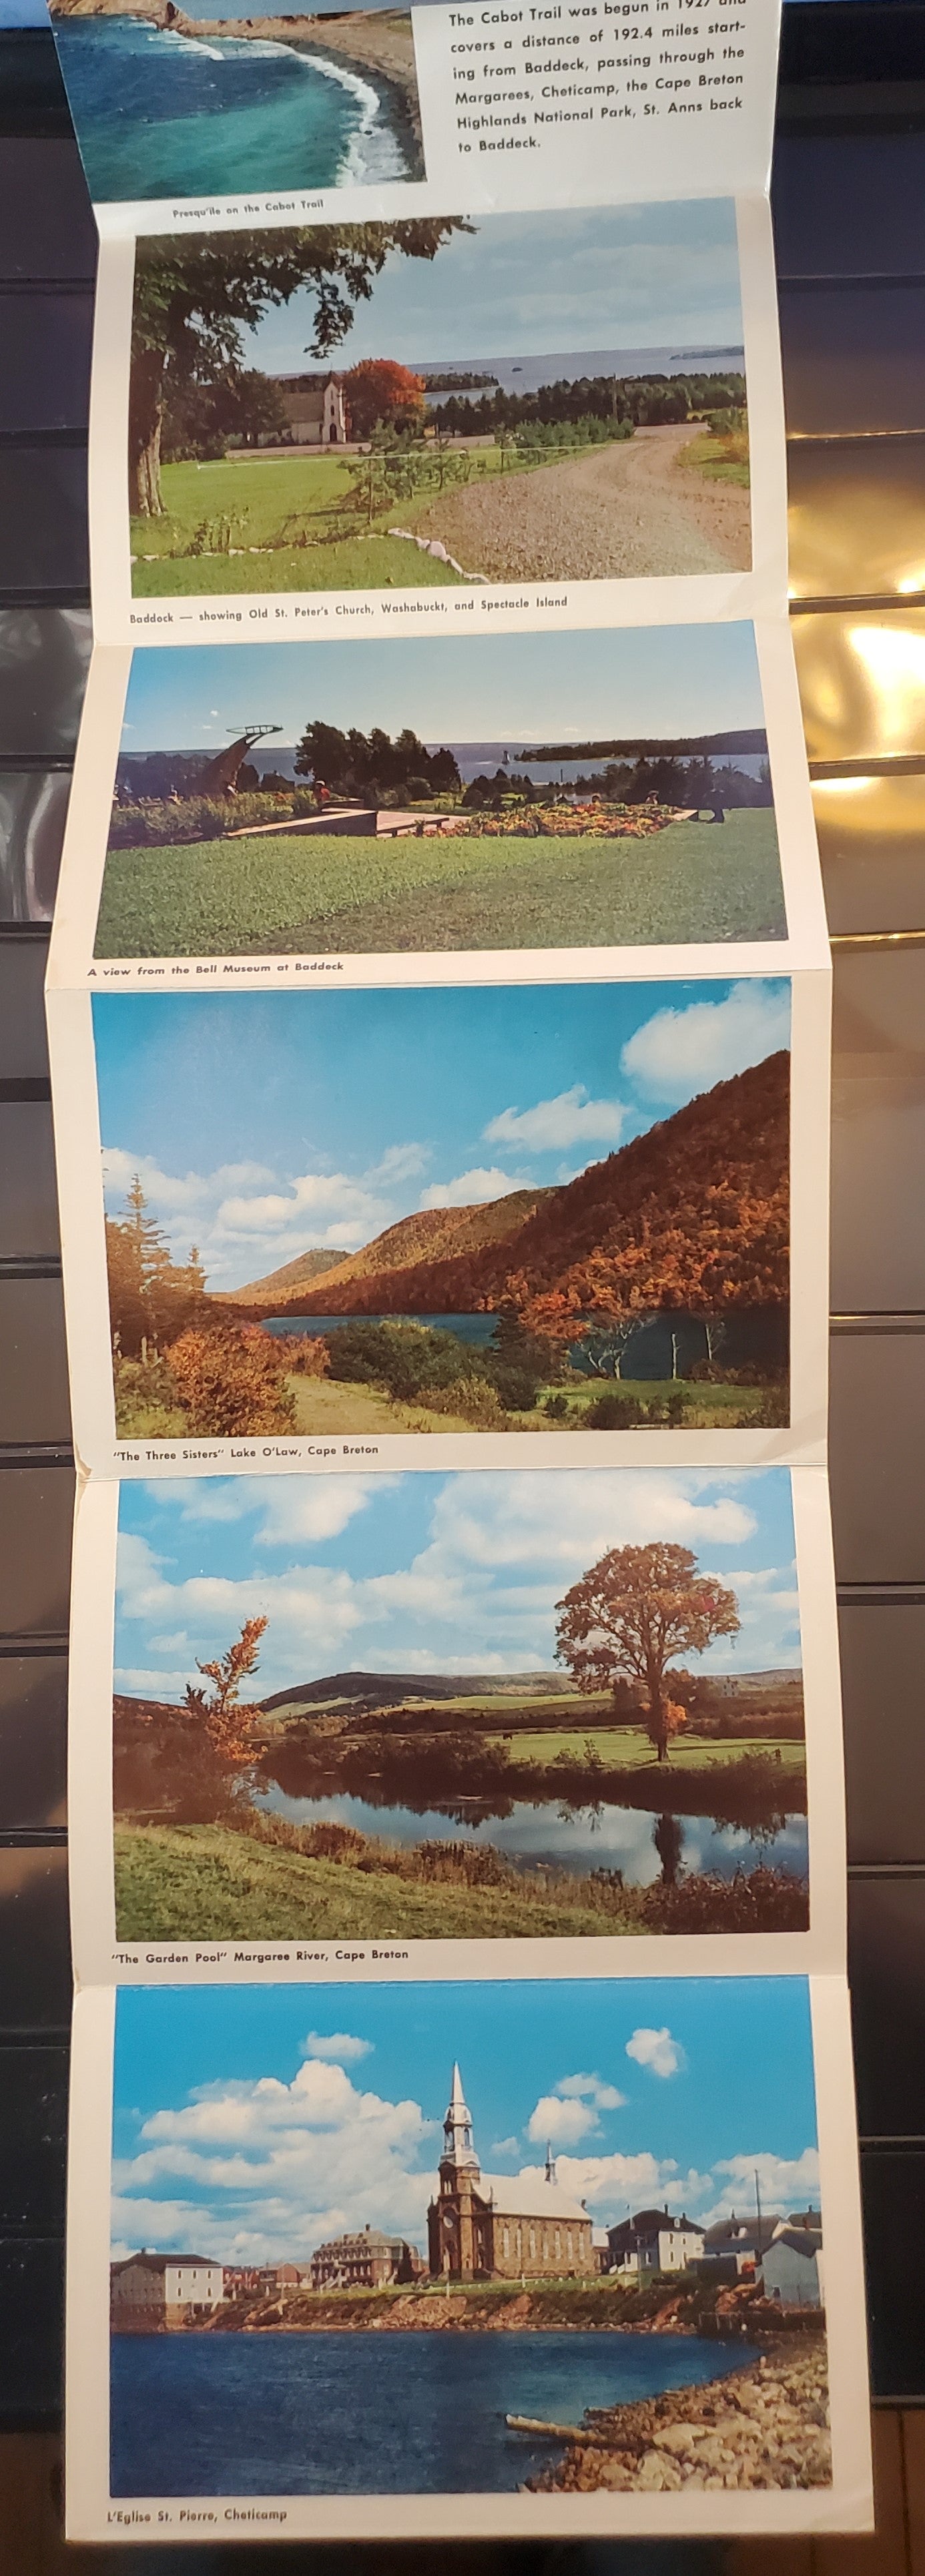 A Group of 2 Souvenir Postcard Folders From Cape Breton, Nova Scotia, Showing Various Scenic Views, From The 1960's, Overall VF, Net Est. $10